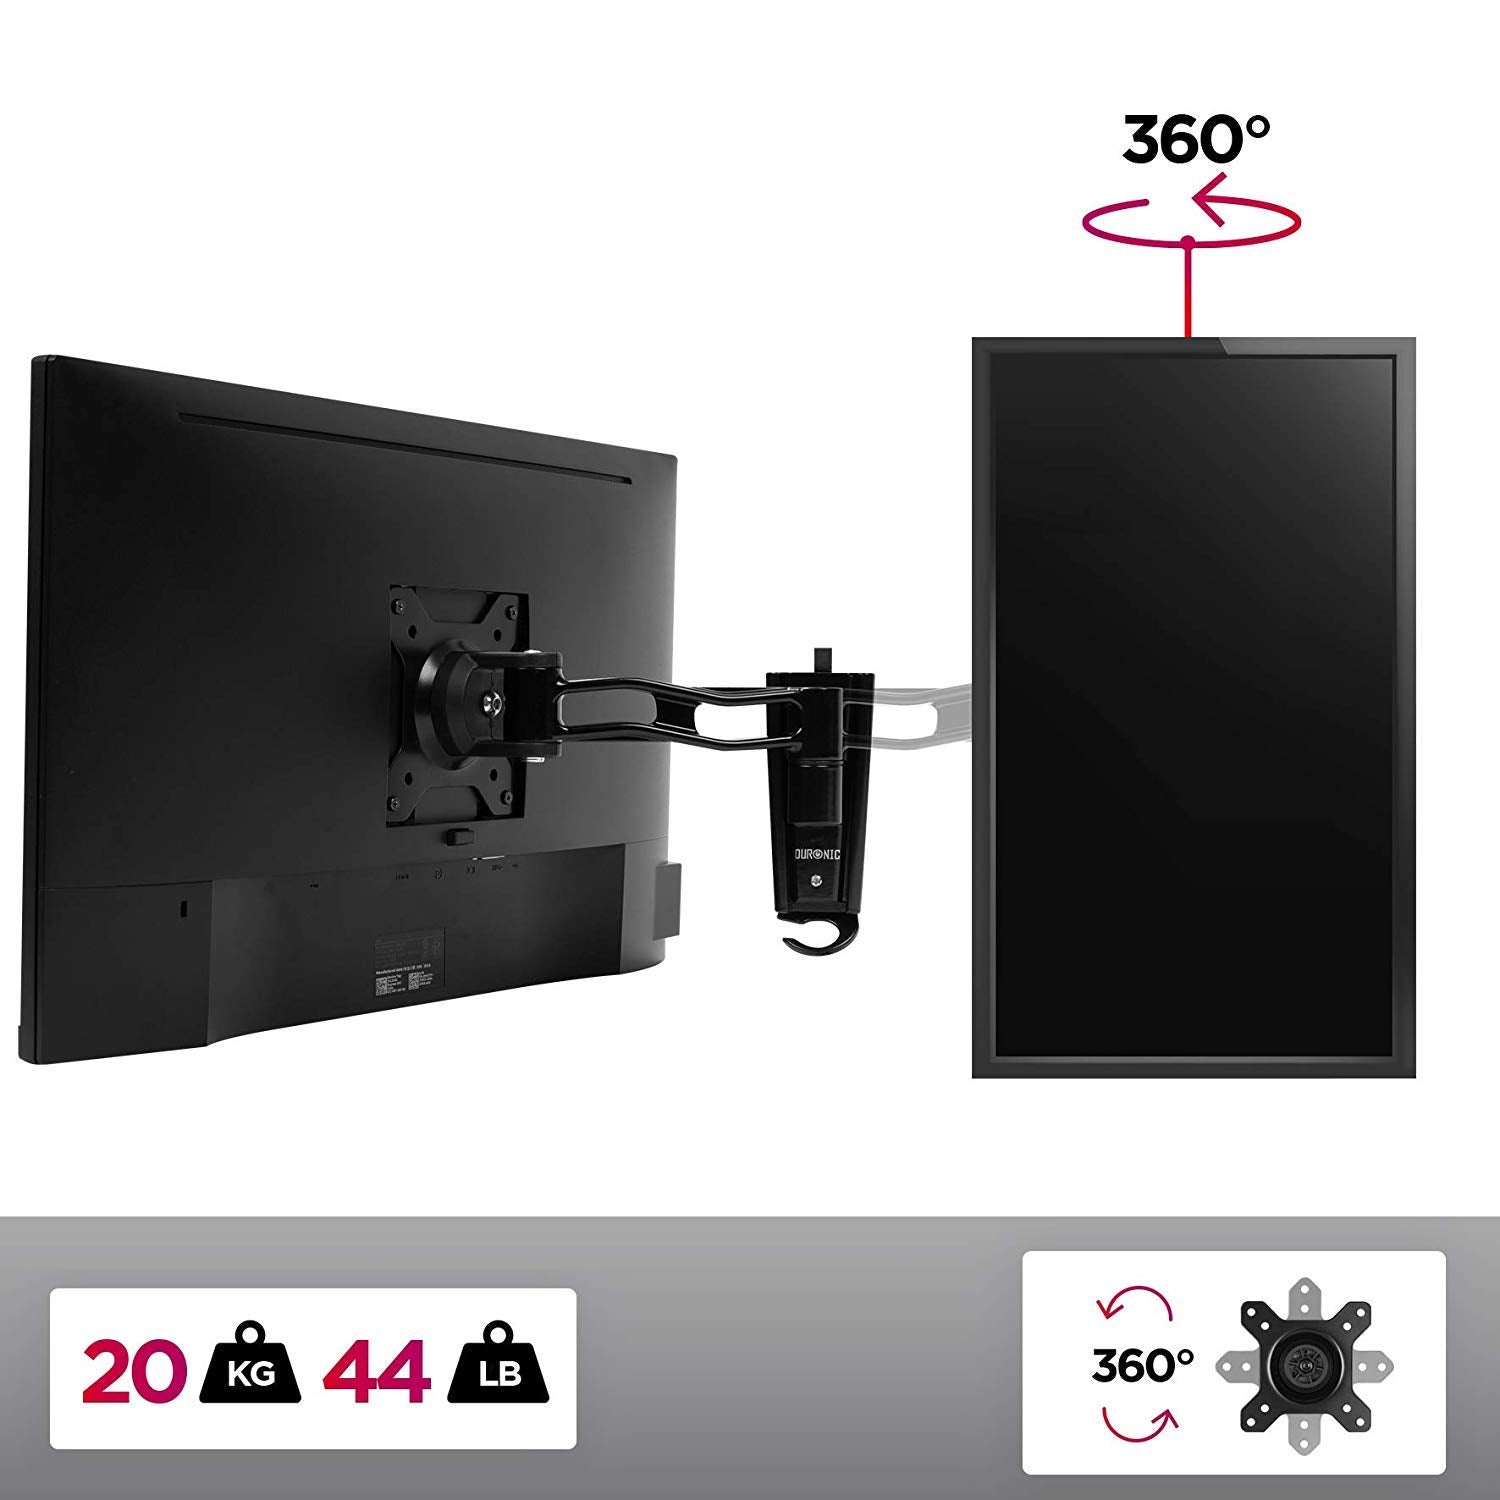 Duronic Monitor Arm Wall Mount DM35W1X2 | Bracket for Single PC Computer Screen | Aluminium | For One 13”-30” LED LCD TV Television | VESA 75/100 Fixing | Tilt +15°/-15°, Swivel 180°, Rotate 360°